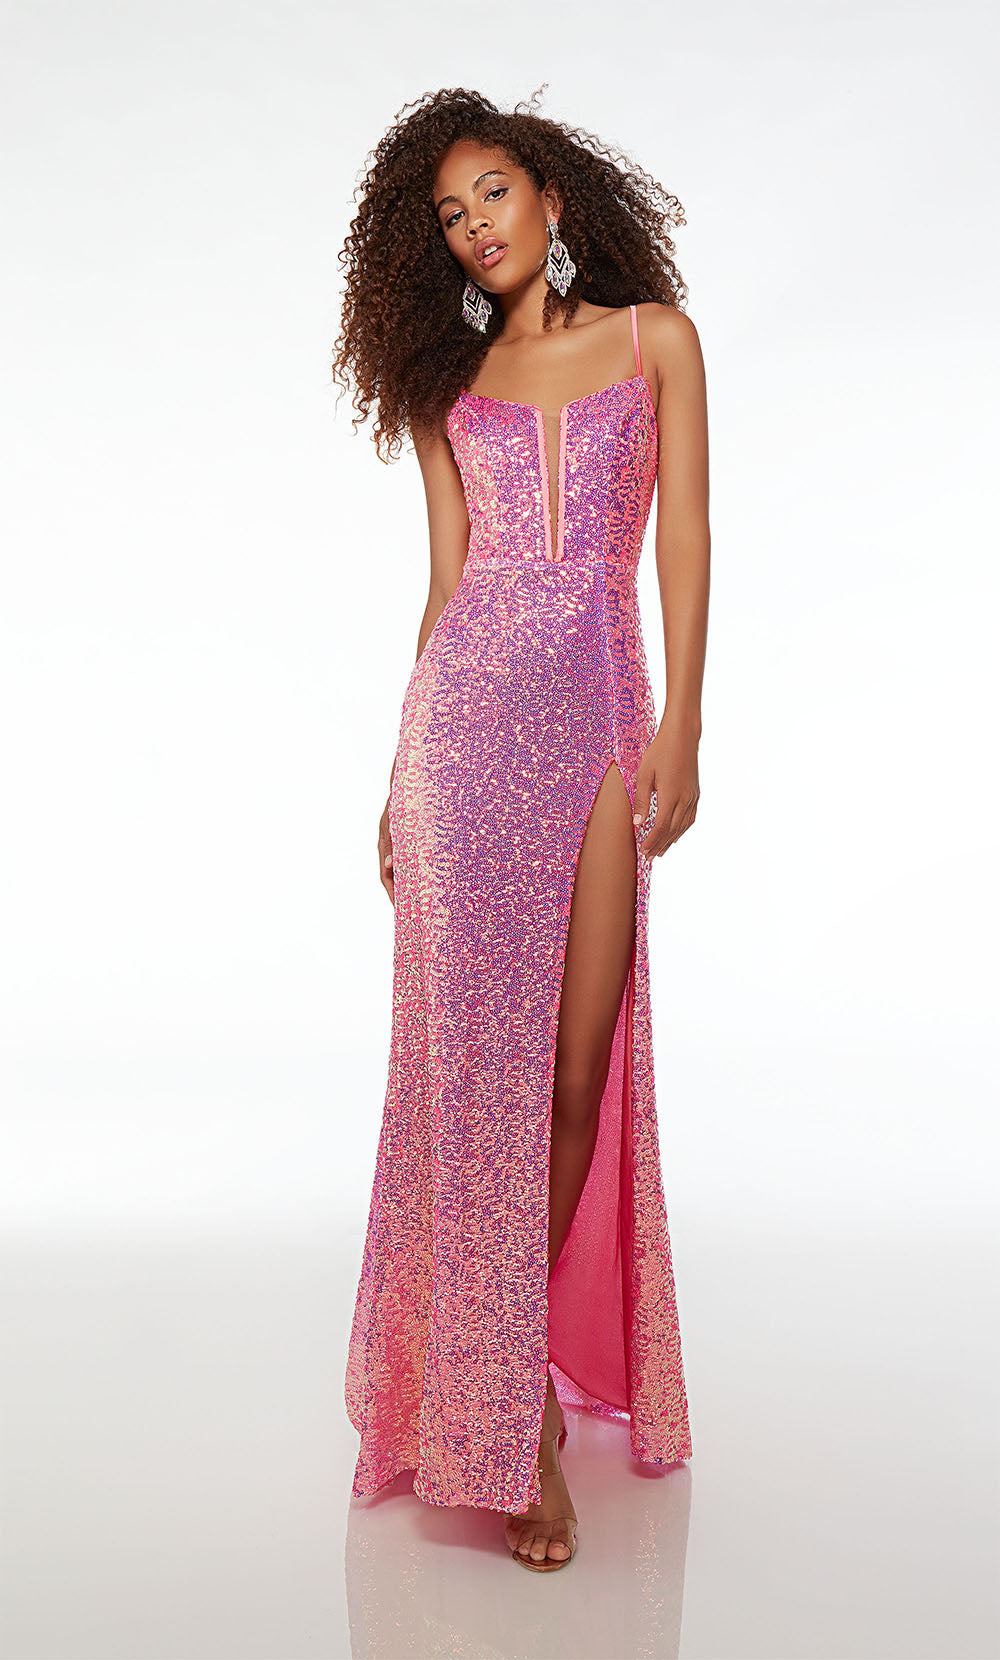 Alyce-61556-Plunging-Neckline-Strappy-Back-Front-Slit-Sequins-Straight-Barbie-Pink-Evening-Dress-B-Chic-Fashions-Prom-Dress